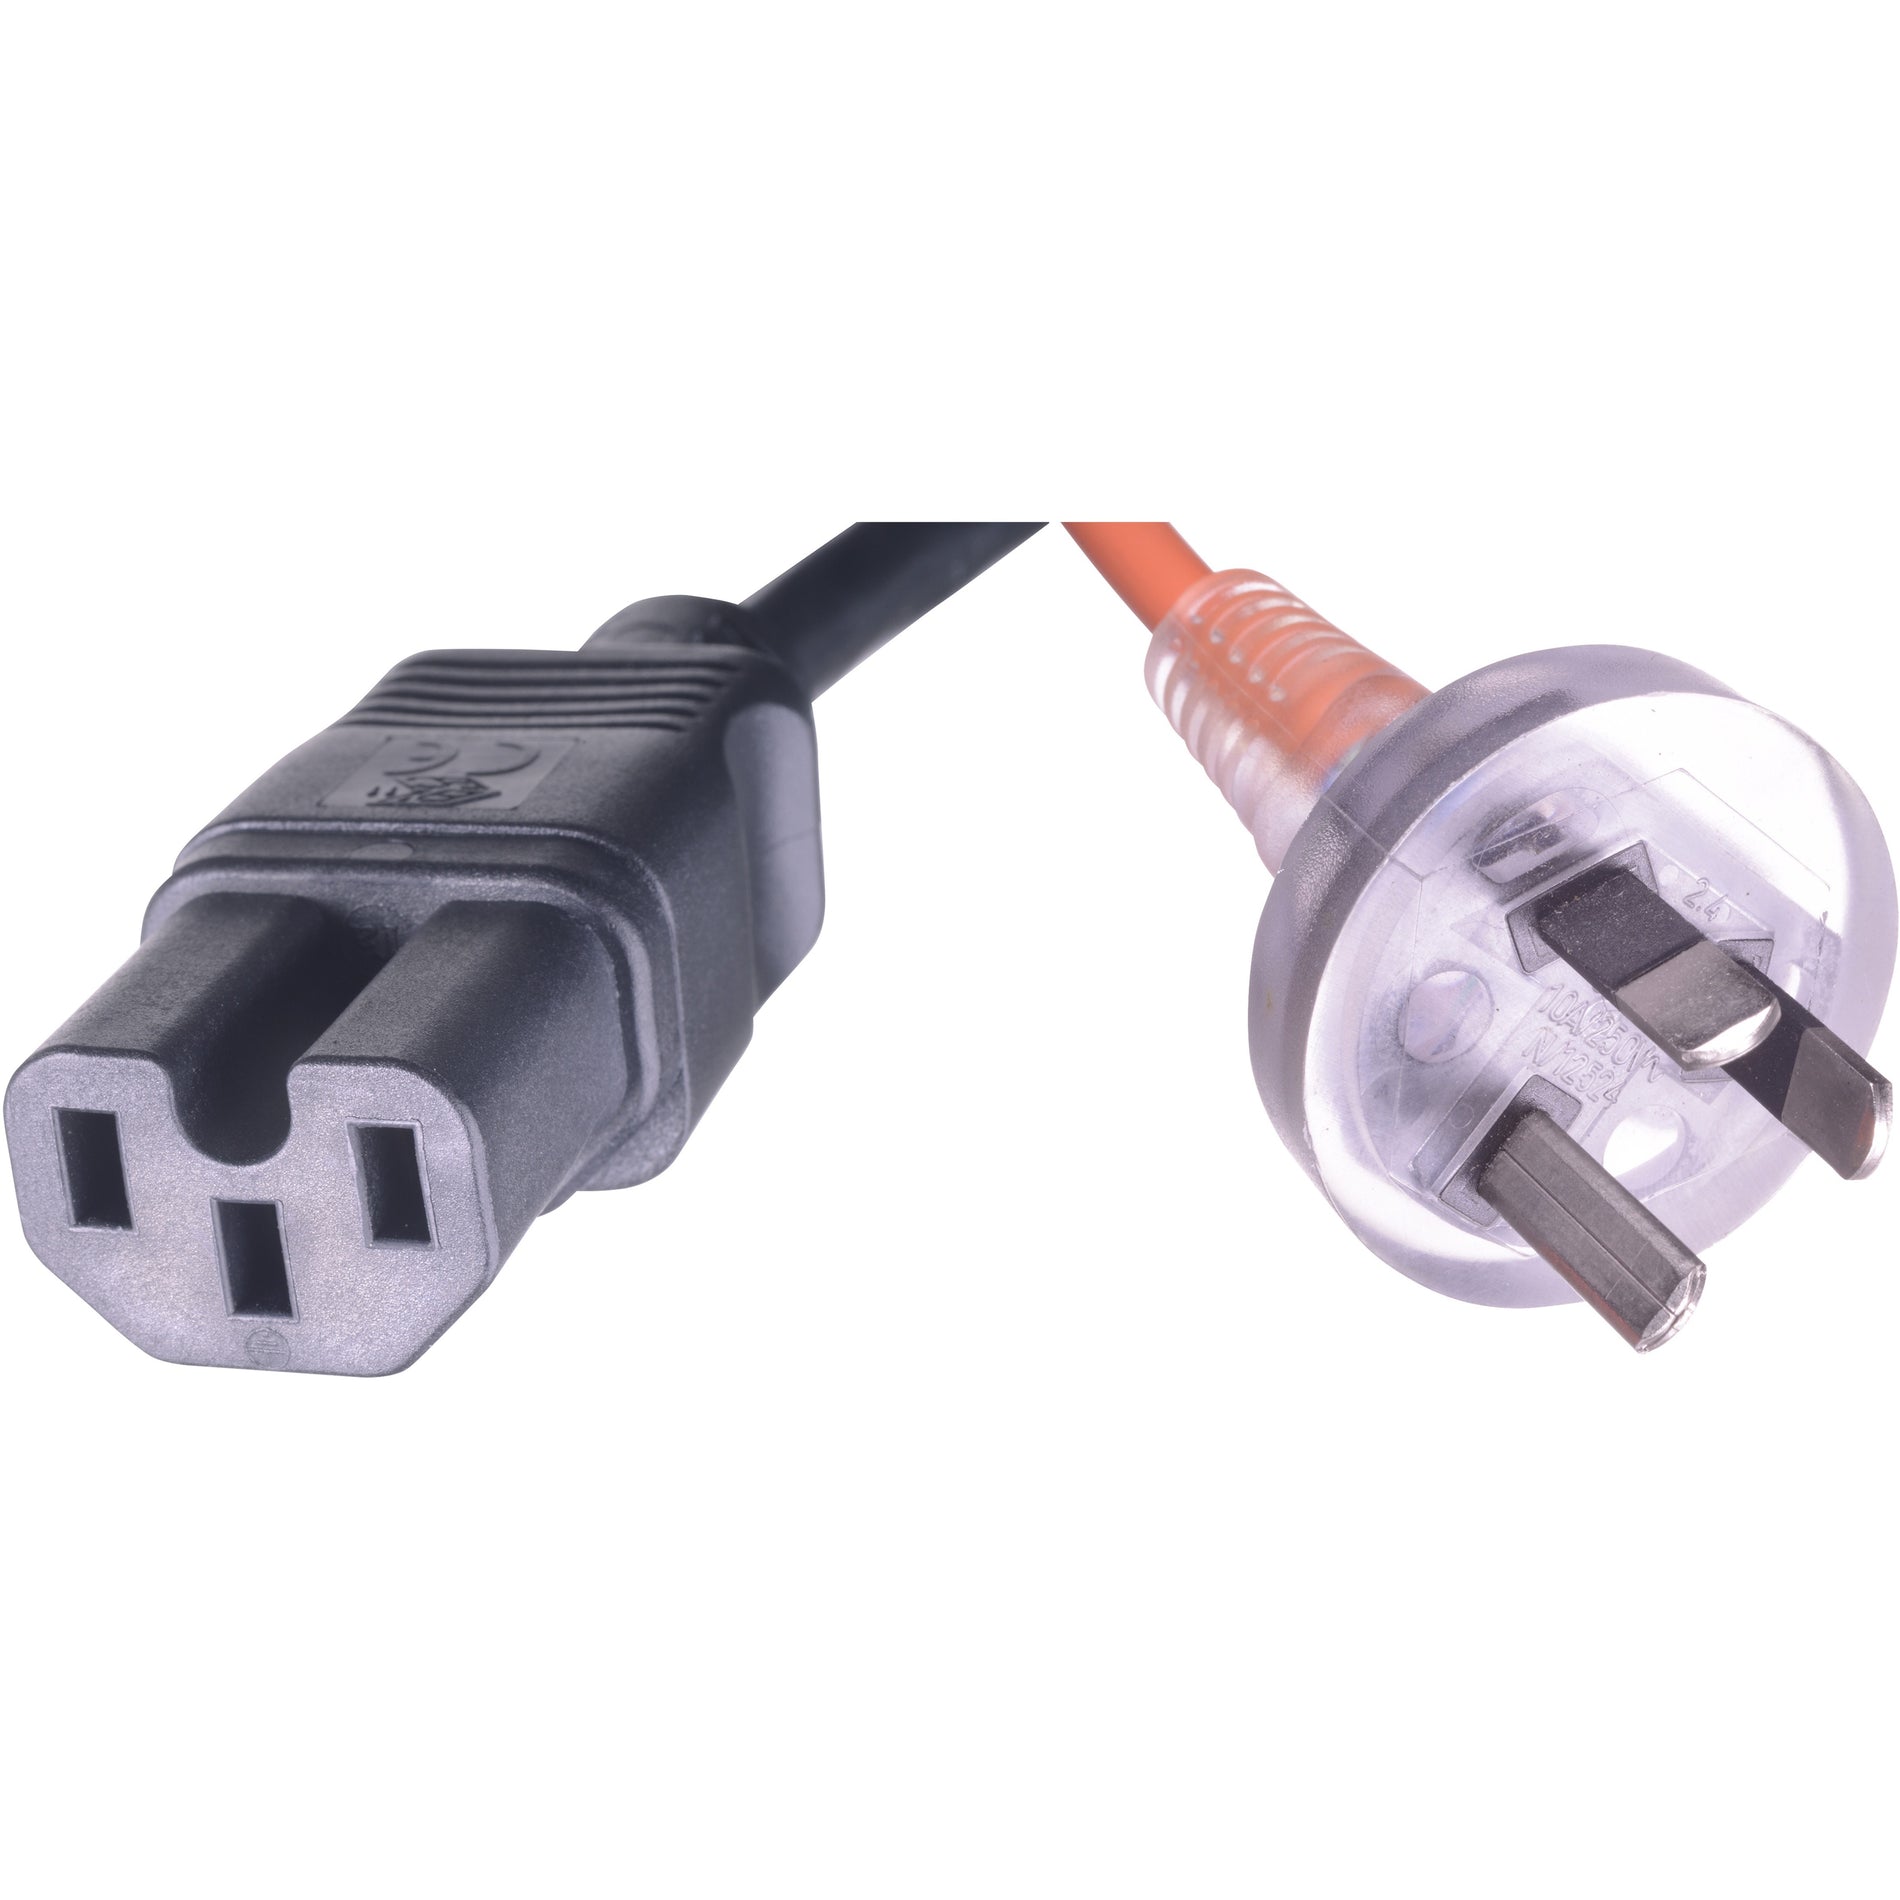 HPE J9941A Standard Power Cord, 8.20 ft Cord Length